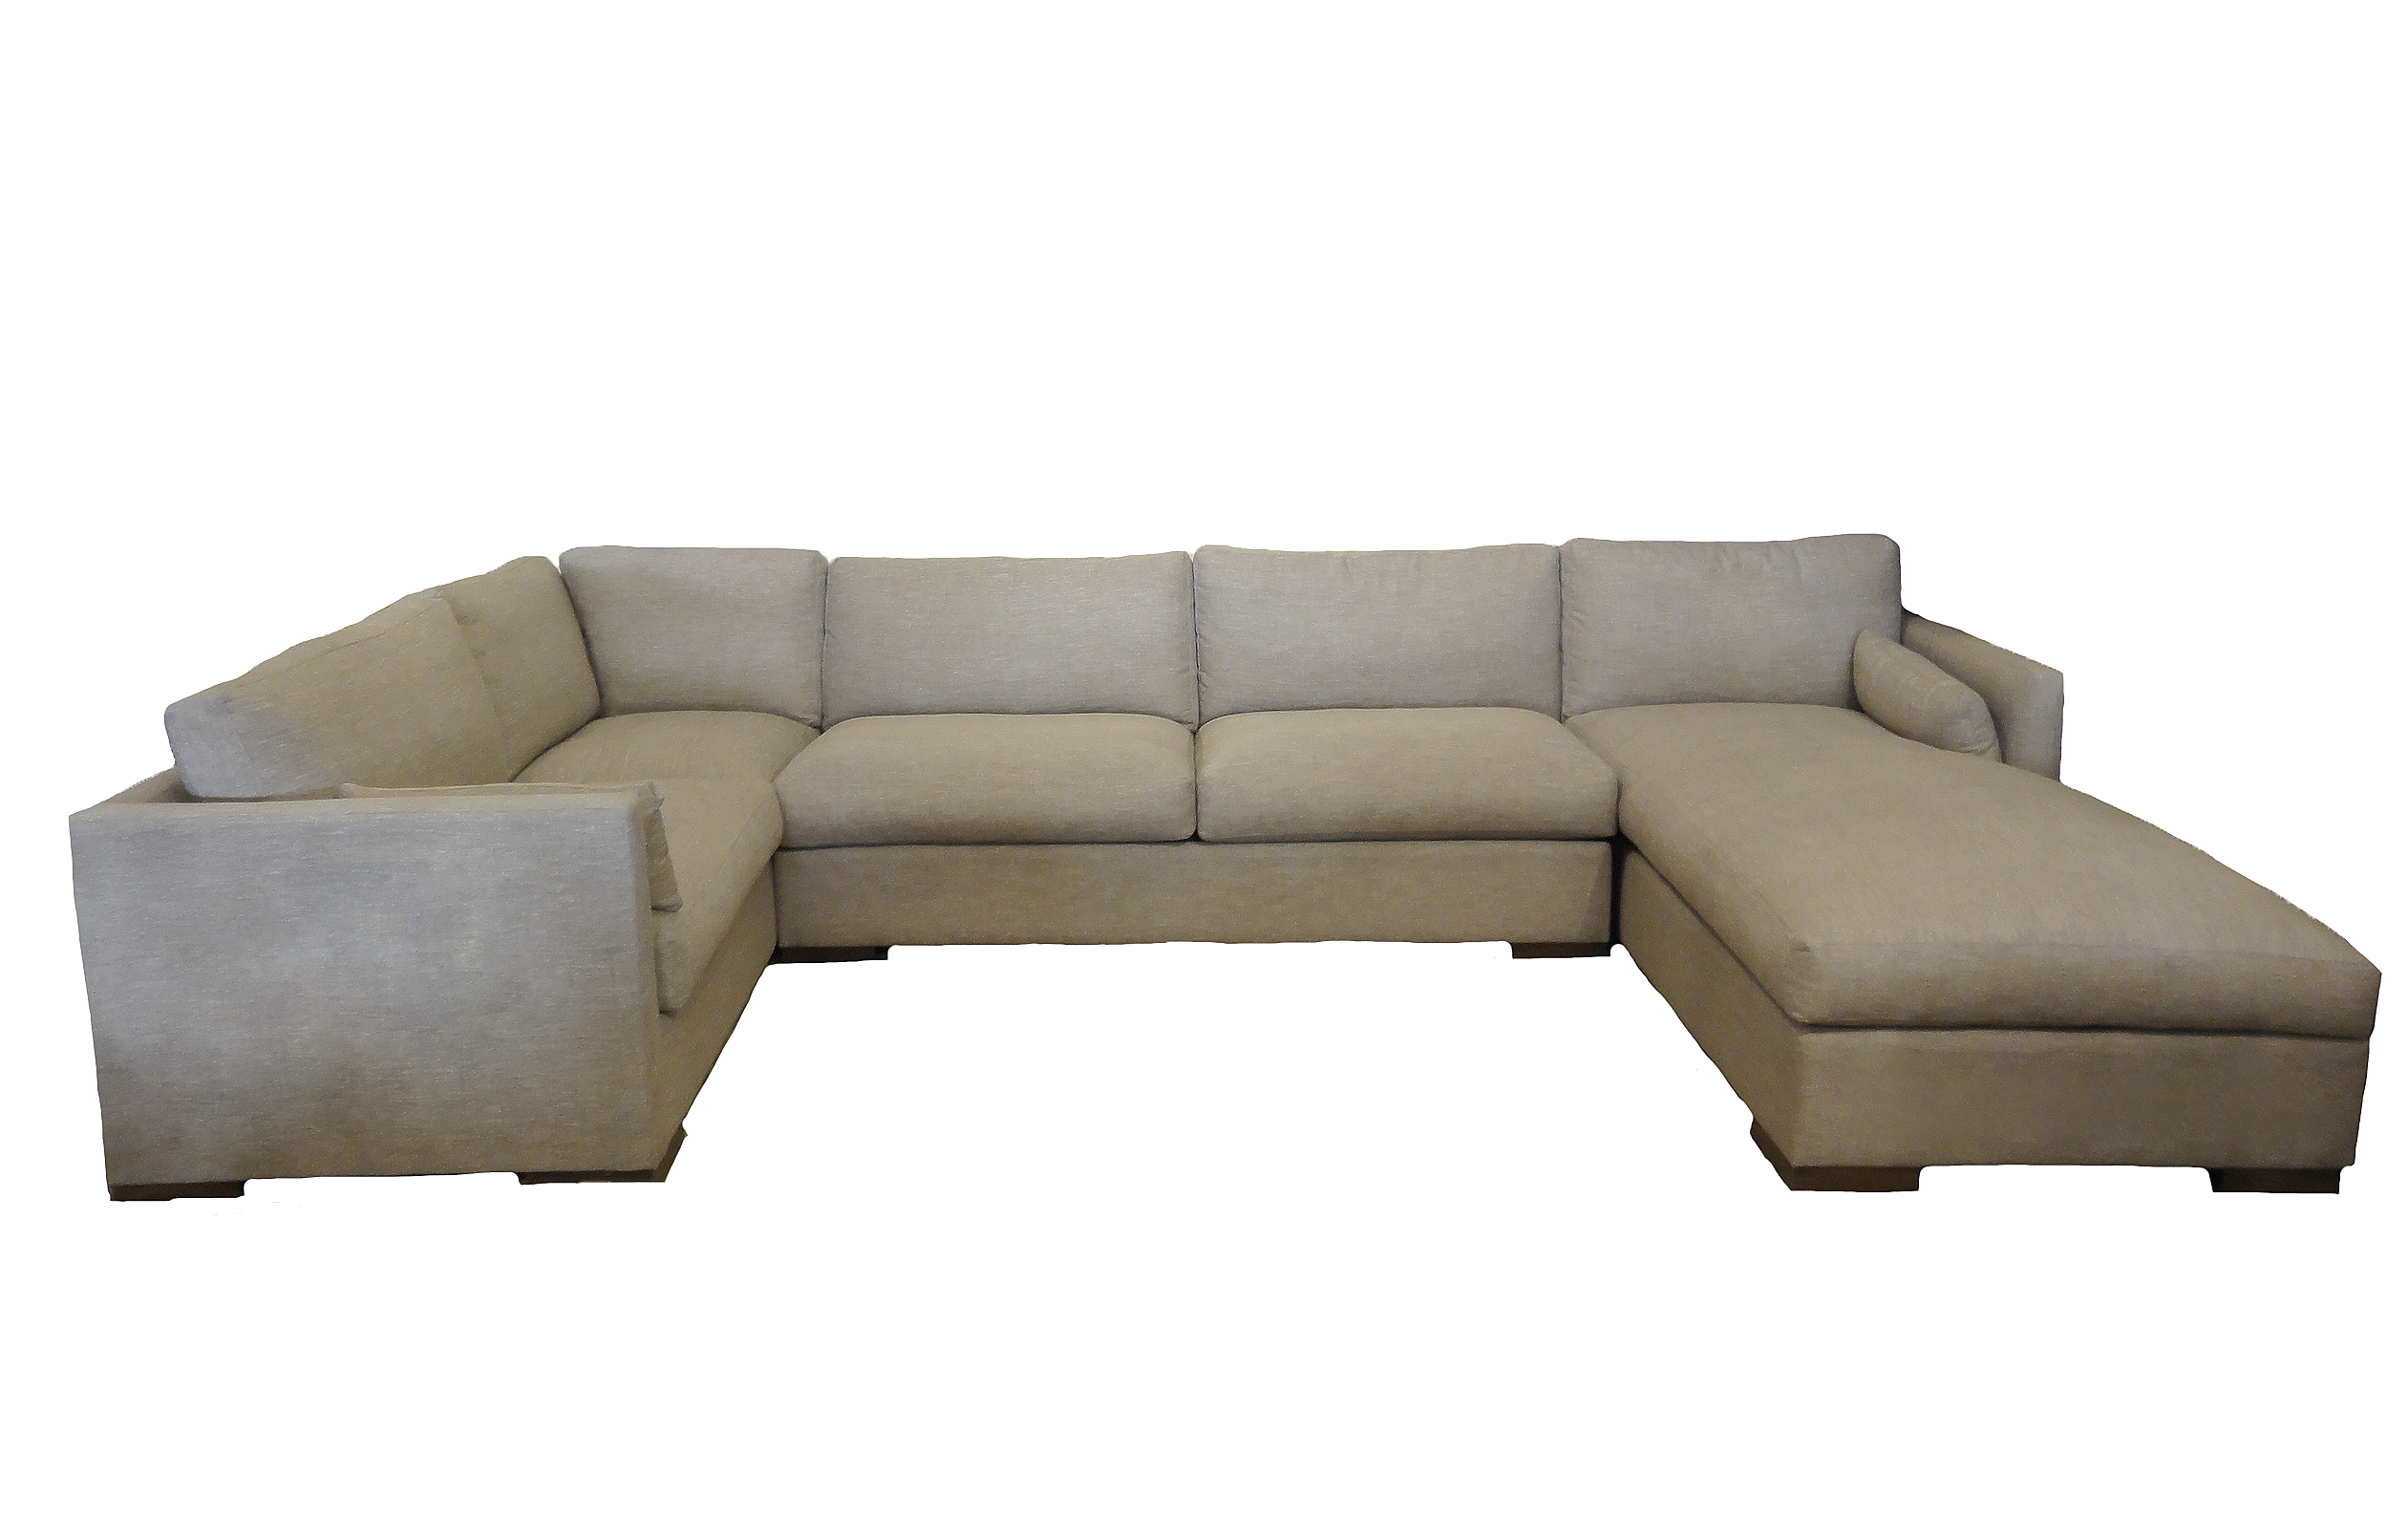 Sarah Conversational Sectional santa barbara design center rugs and more sofa couch sectional loveseat